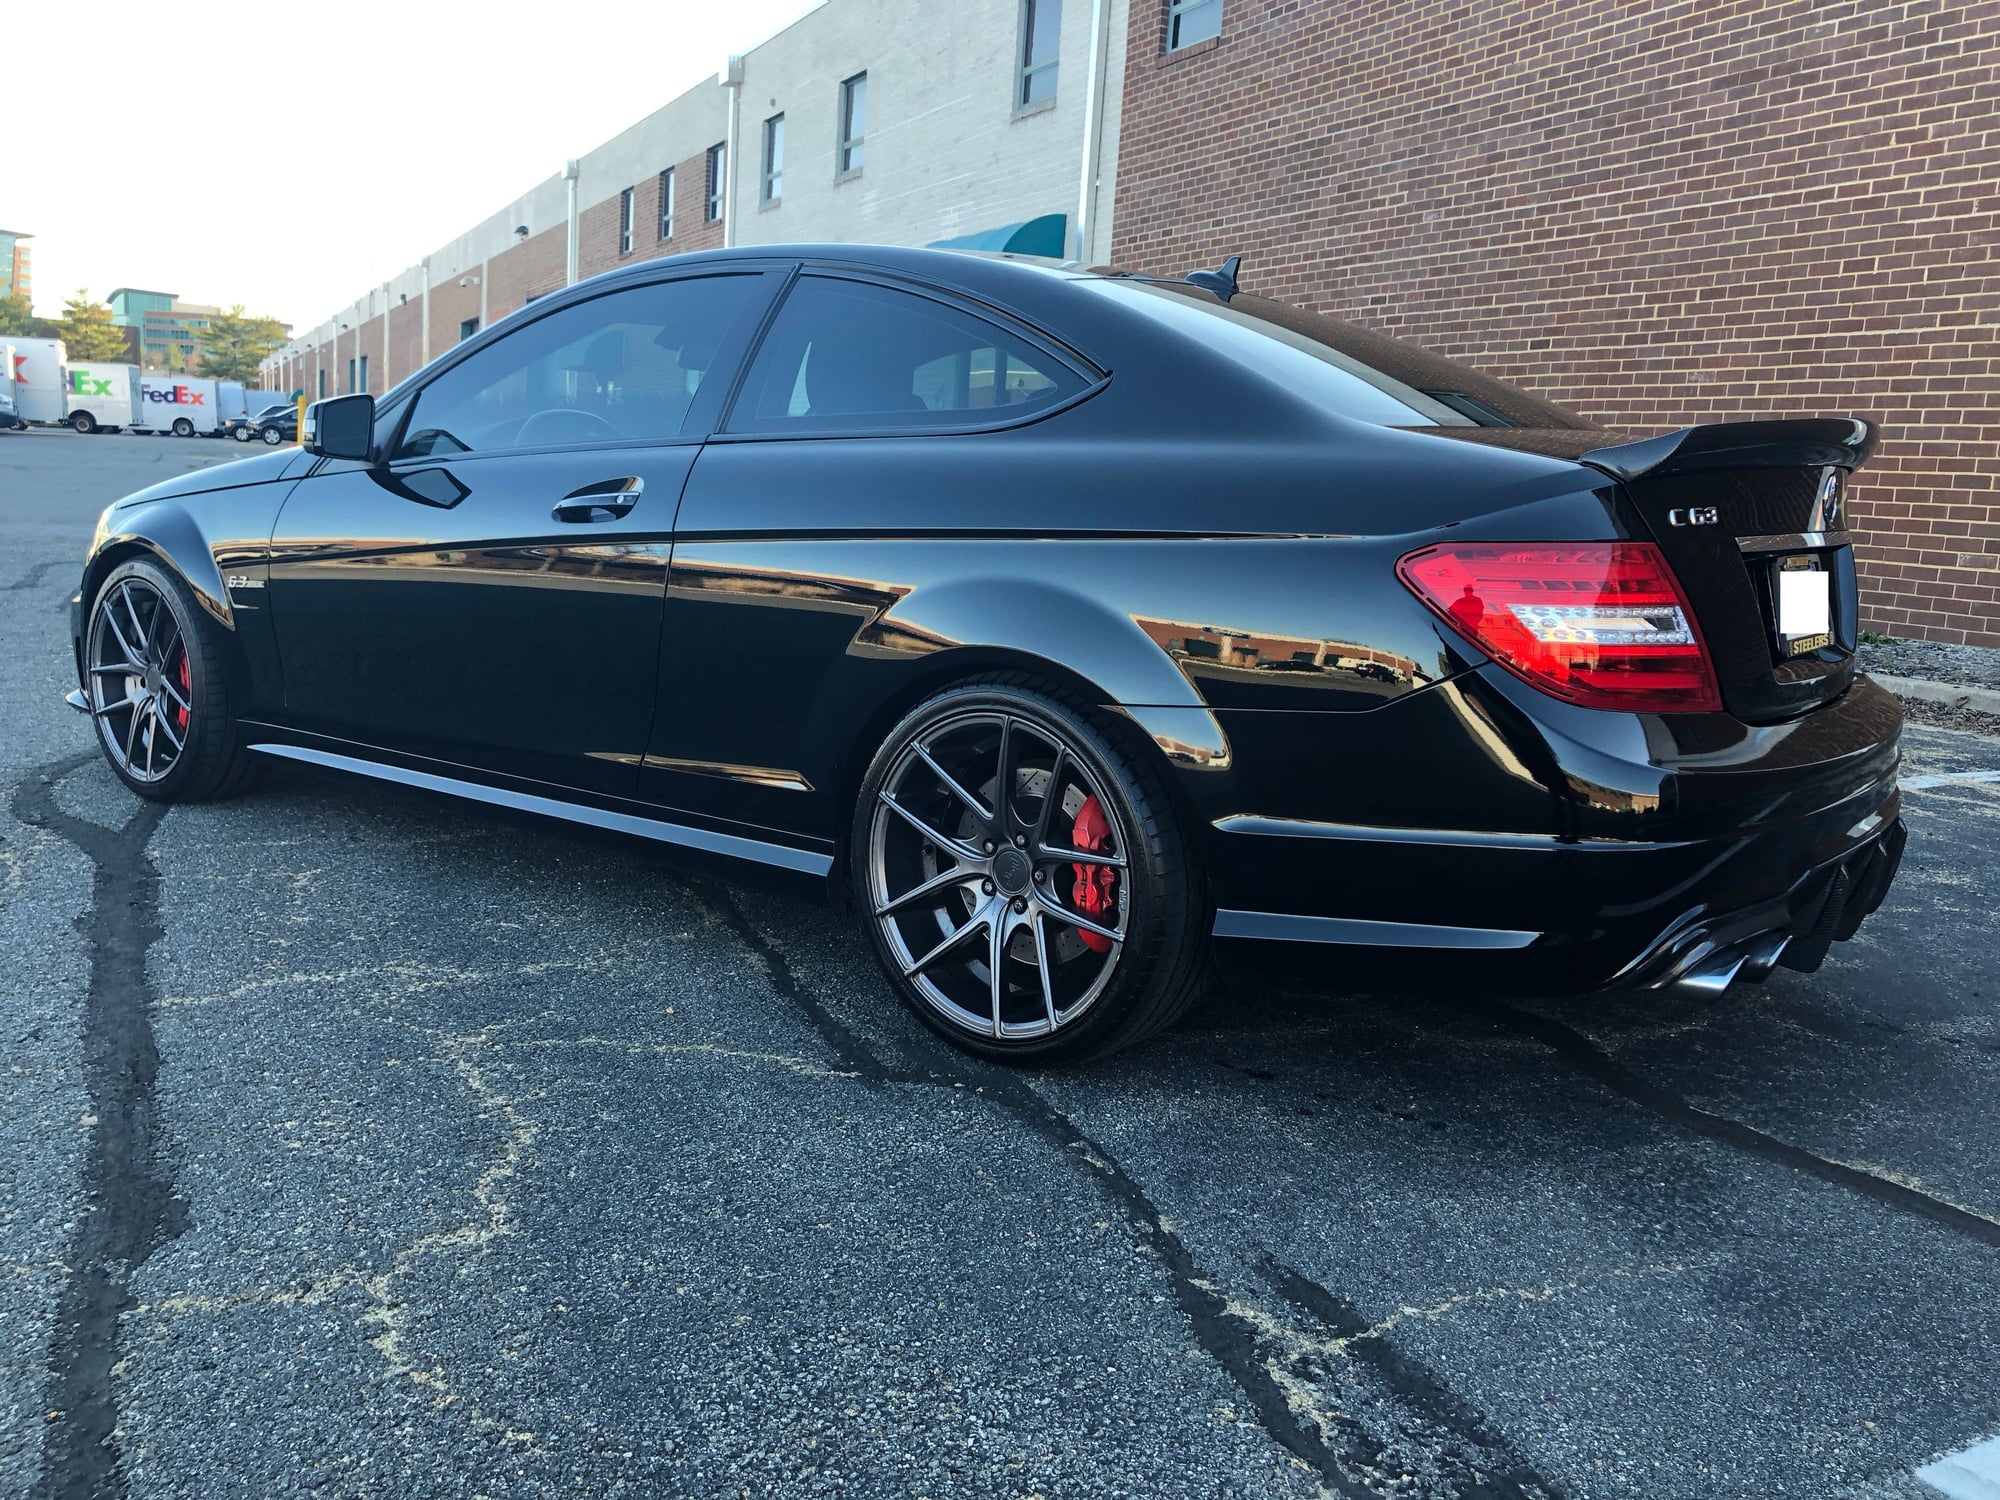 2012 Mercedes-Benz C63 AMG - 2012 Mercedes C63 AMG Coupe - Used - VIN WDDGJ7HB1CF811579 - 77,000 Miles - 8 cyl - 2WD - Automatic - Coupe - Black - Alexandria, VA 22310, United States